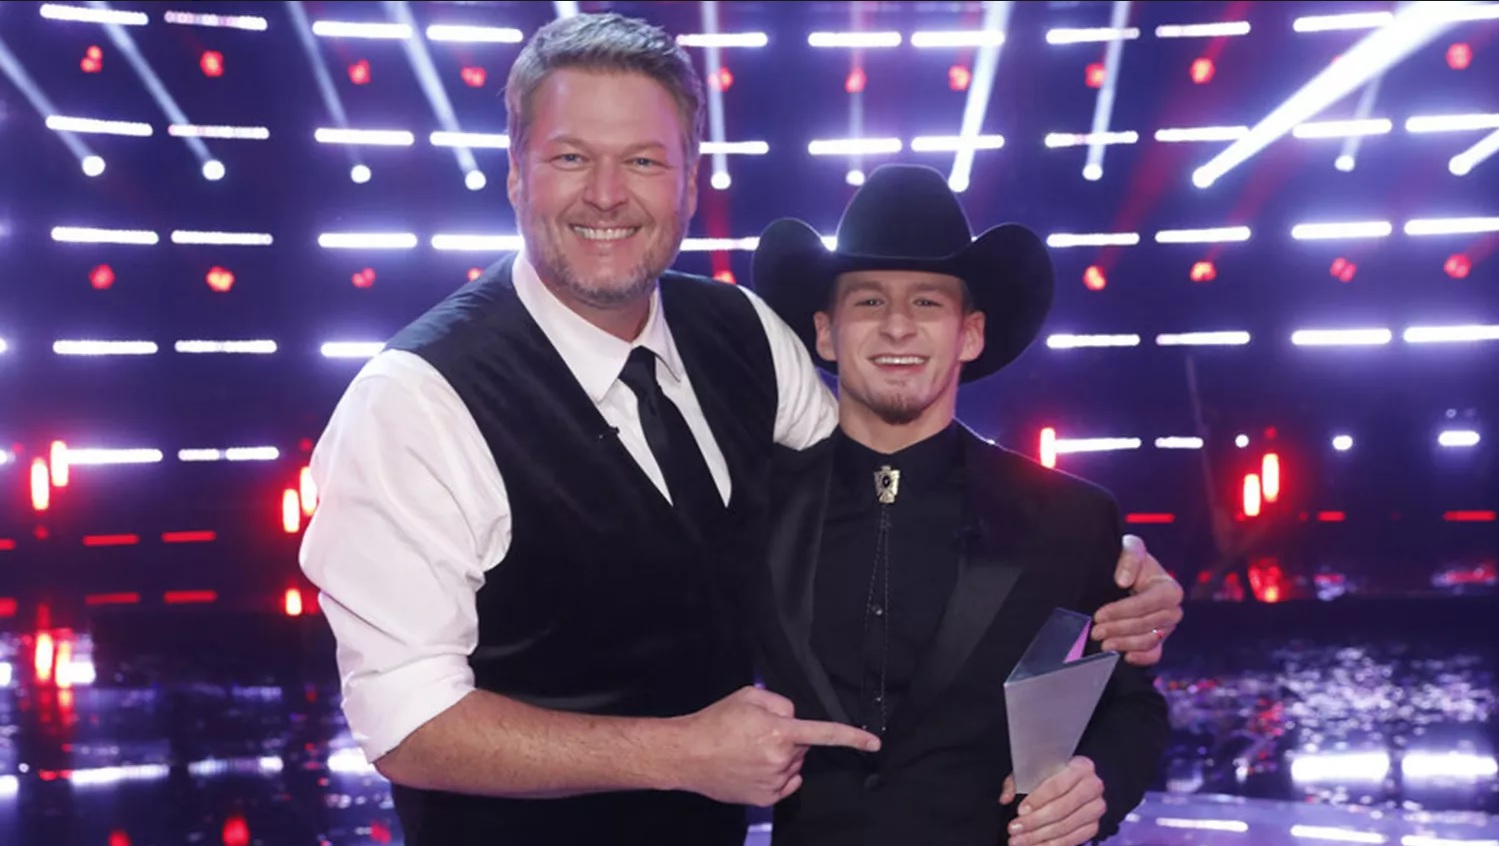 NBC’s The Voice | Bryce Leatherwood Recounts Life Journey towards Being the Winner